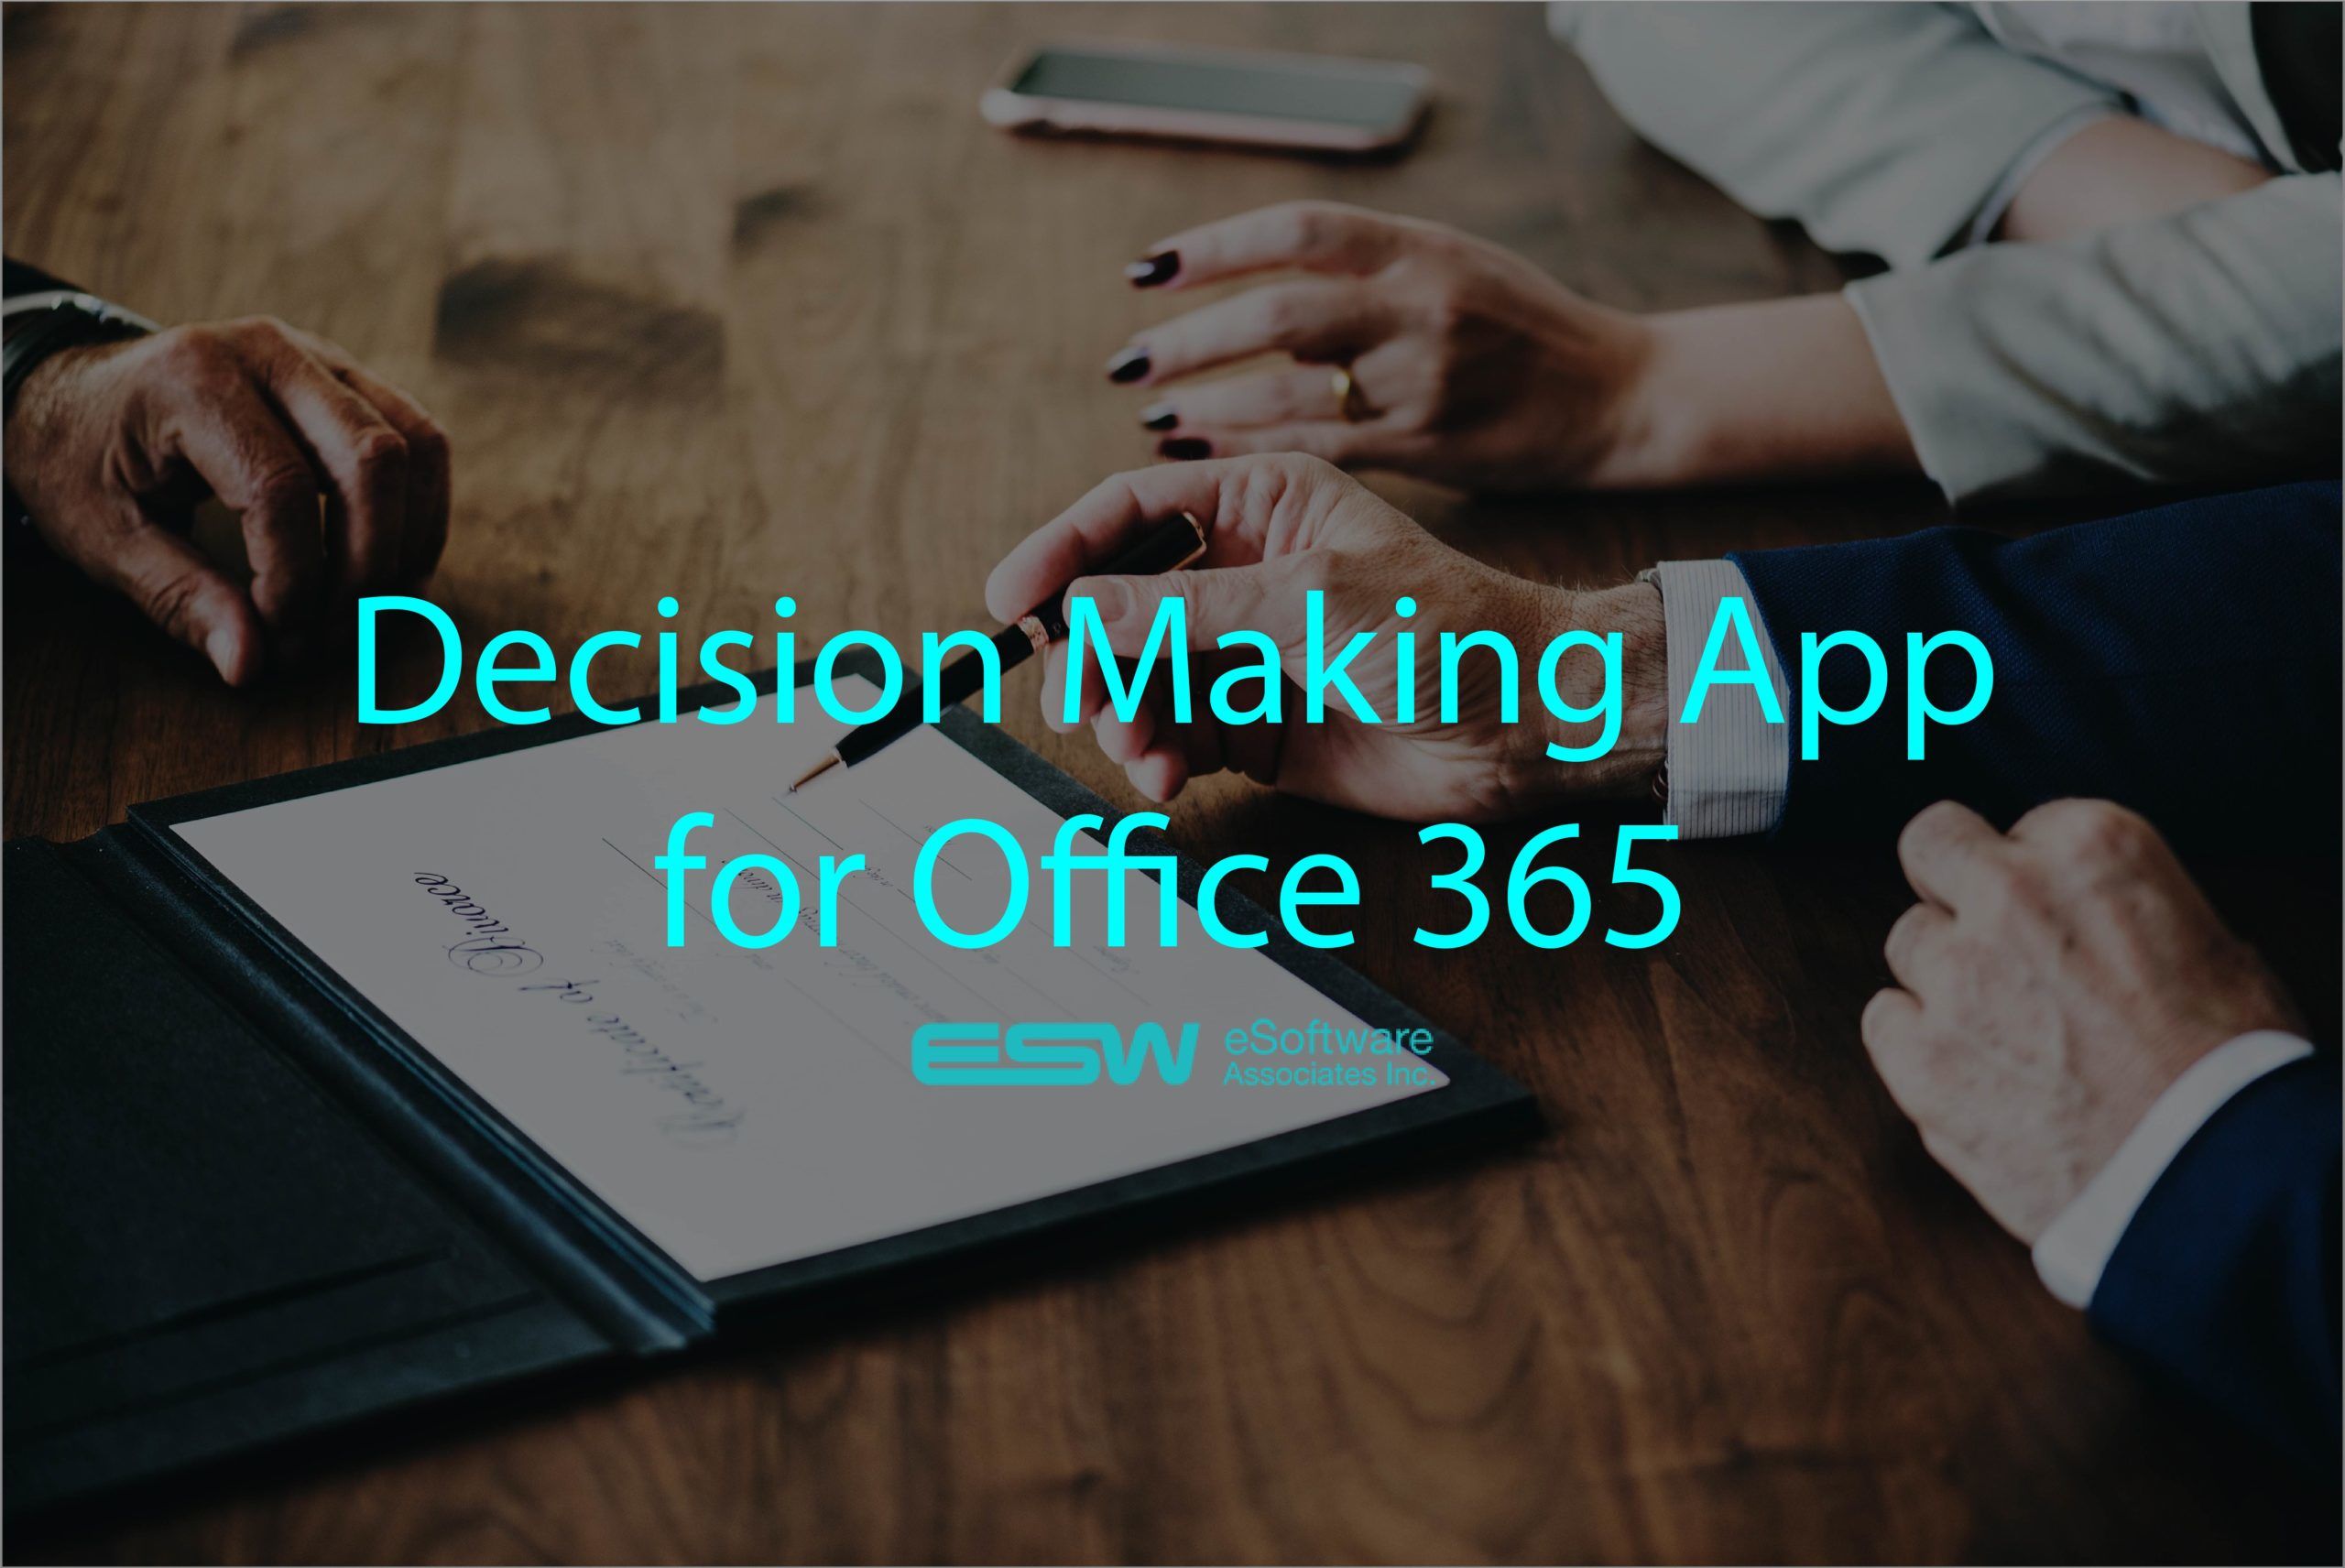 Decision Making App for Office 365